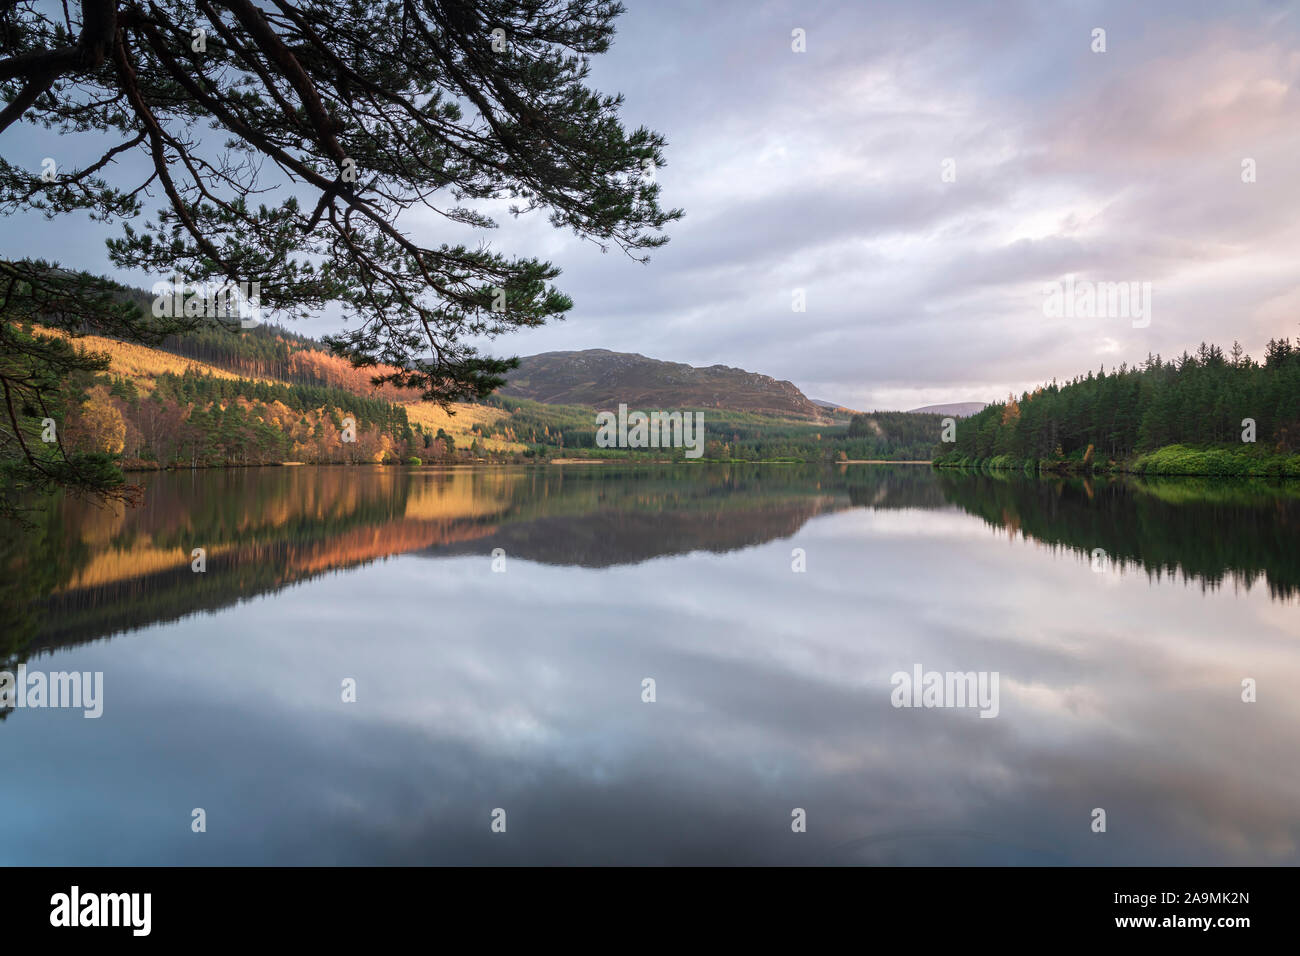 An autumnal HDR image of the reflective still waters of Loch Farr in Strathnairn, Scotland. 05 November 2019 Stock Photo